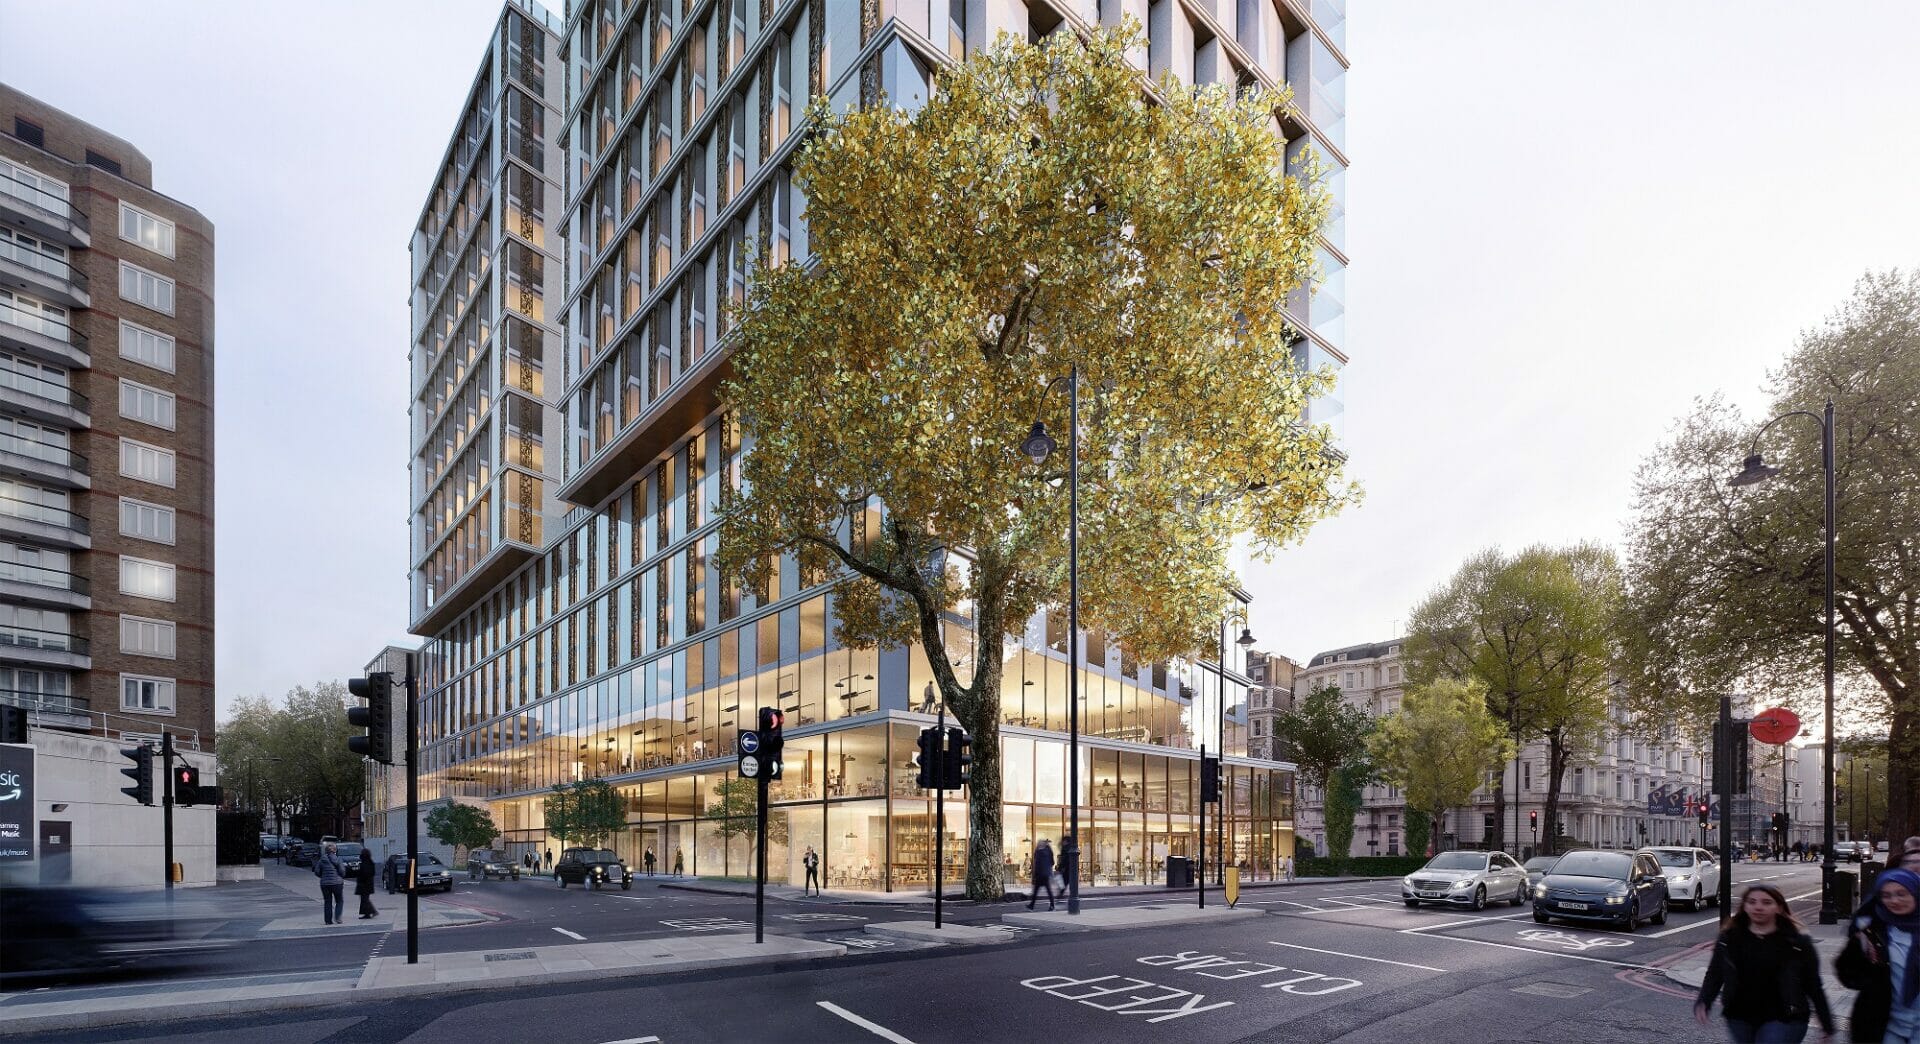 Queensgate Investments and Rockwell secure planning permission for £1bn landmark London hotel @SimpsonHaugh